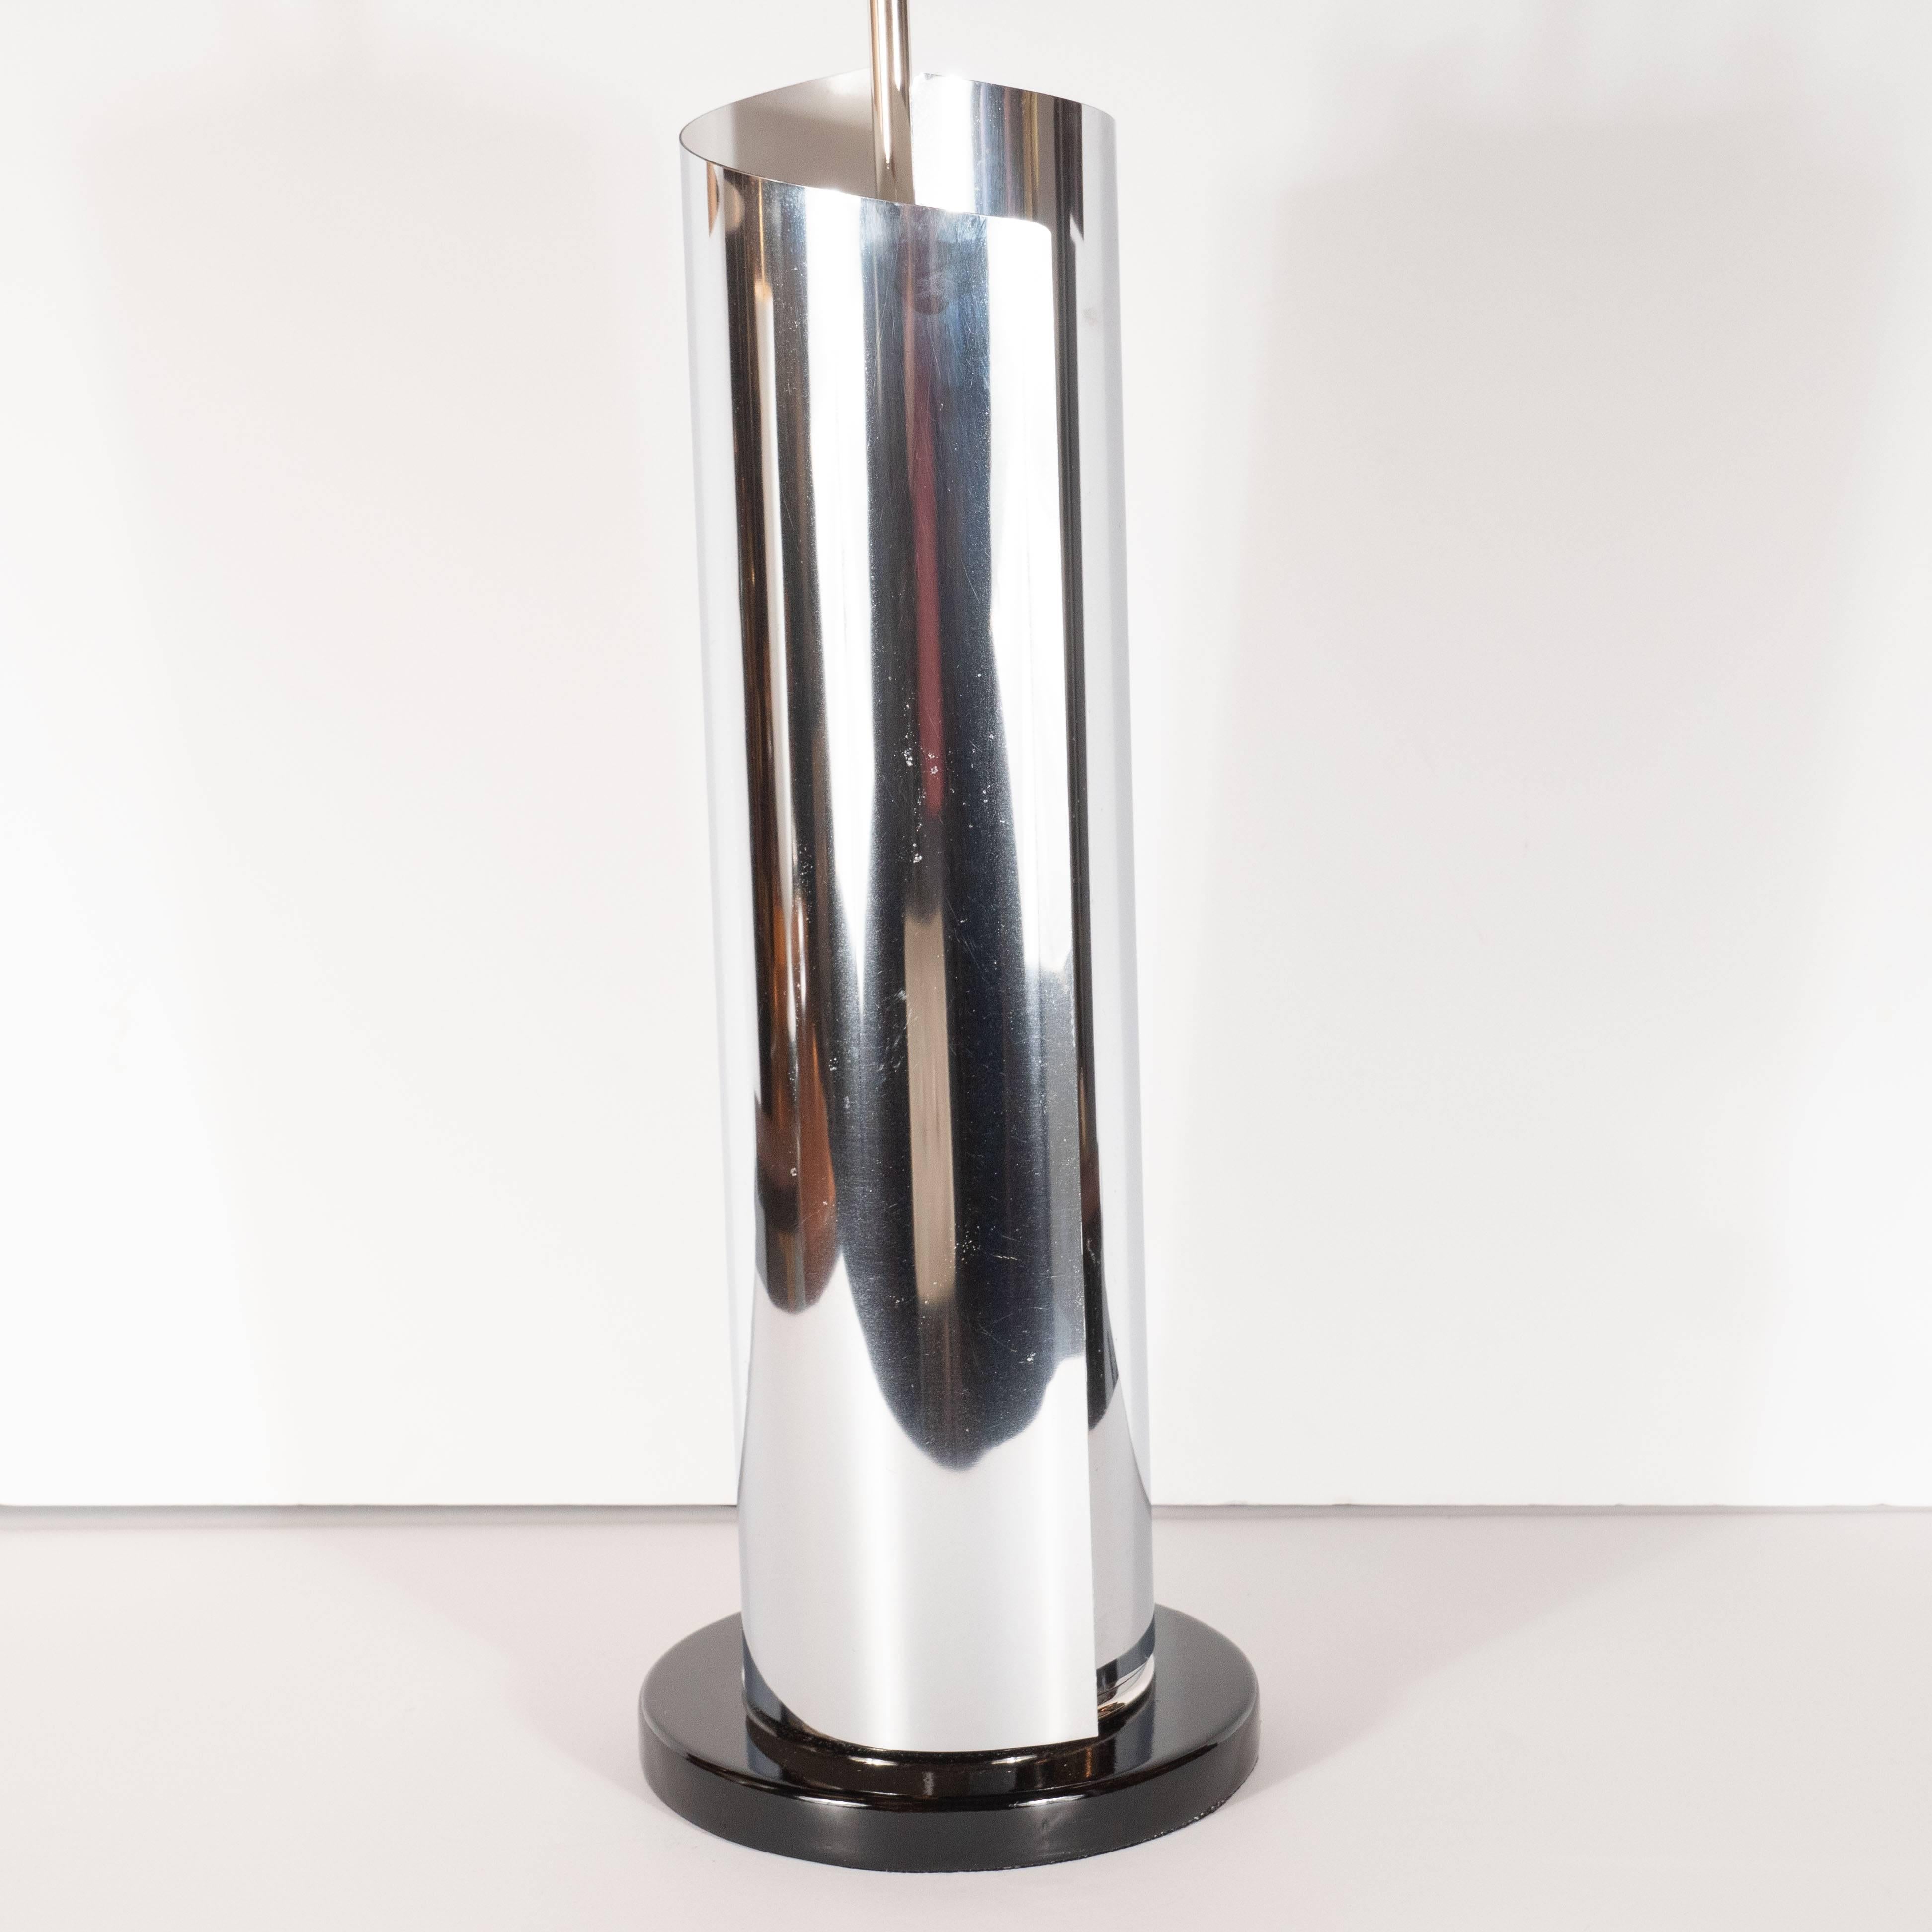 This stunning pair of table lamps were realized in the United States, circa 1970. It features a cylindrical bodies in polished chrome- whose curled forms suggests a miniature Richard Serra sculptures and cream lacquer interiors. They sit on circular